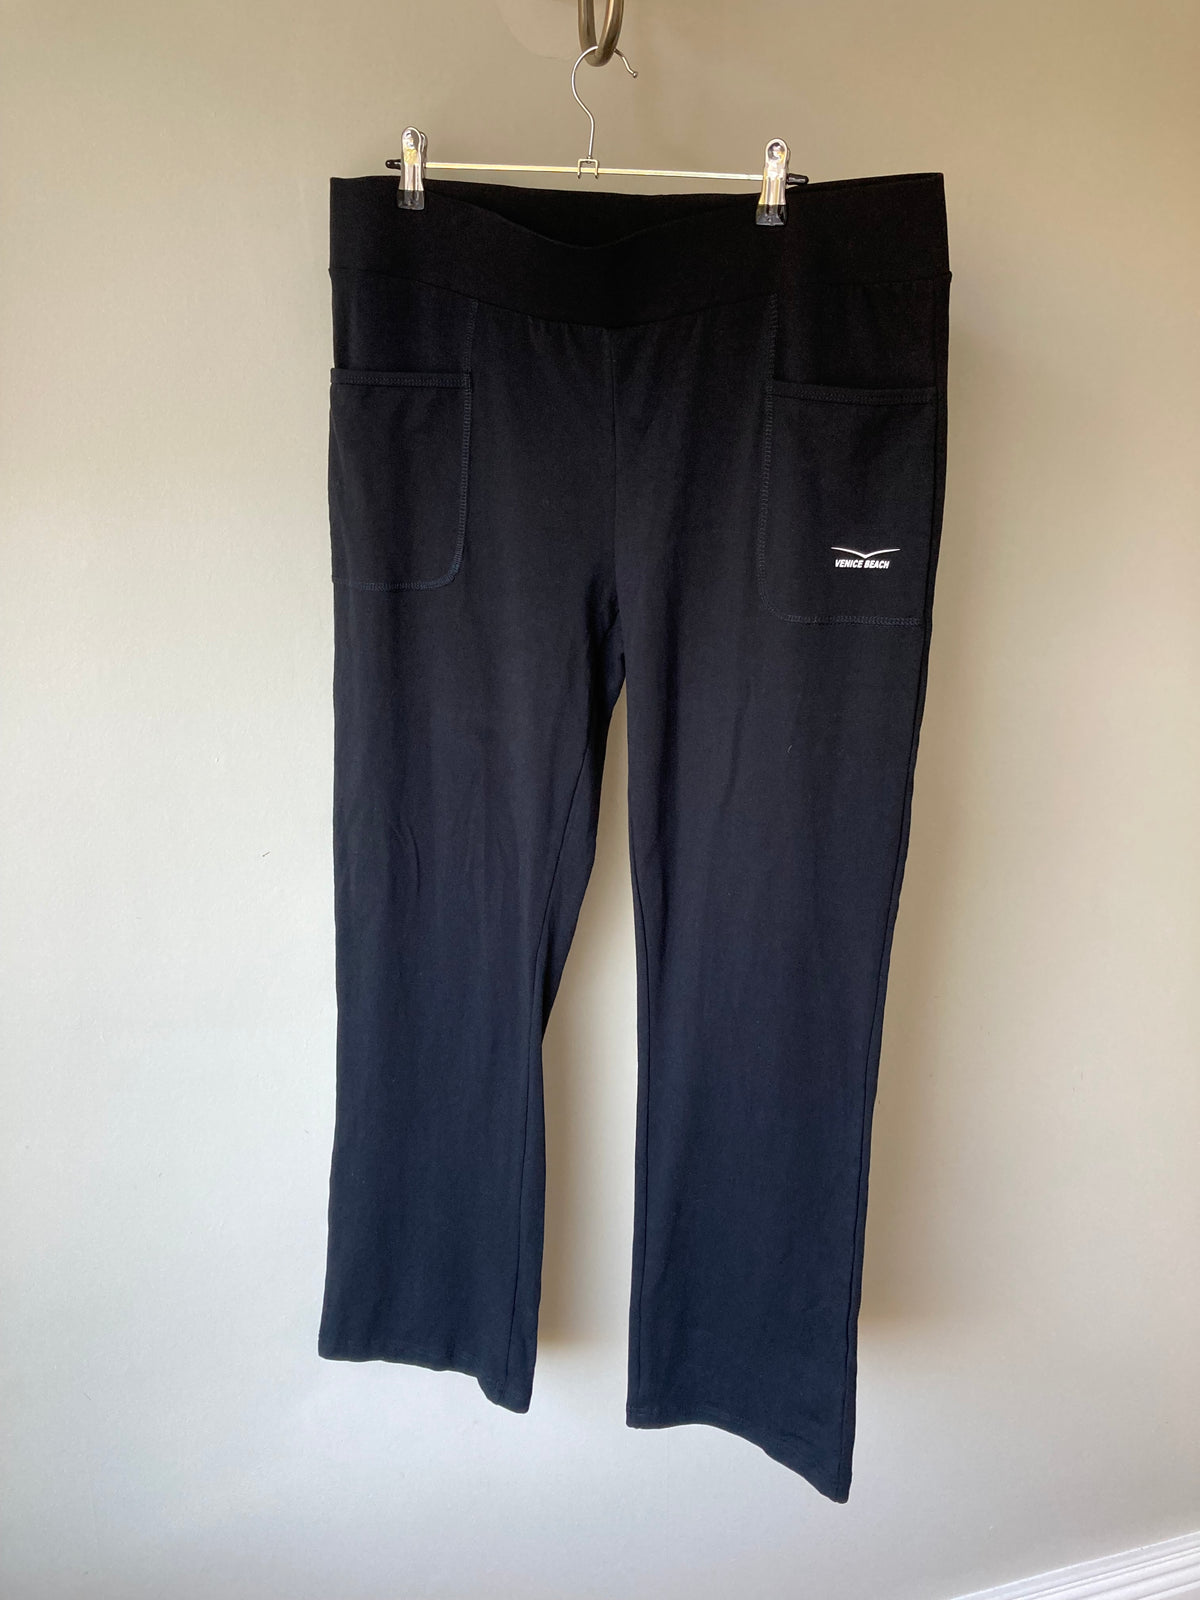 Black curve trousers by VENICE BEACH - Size 20